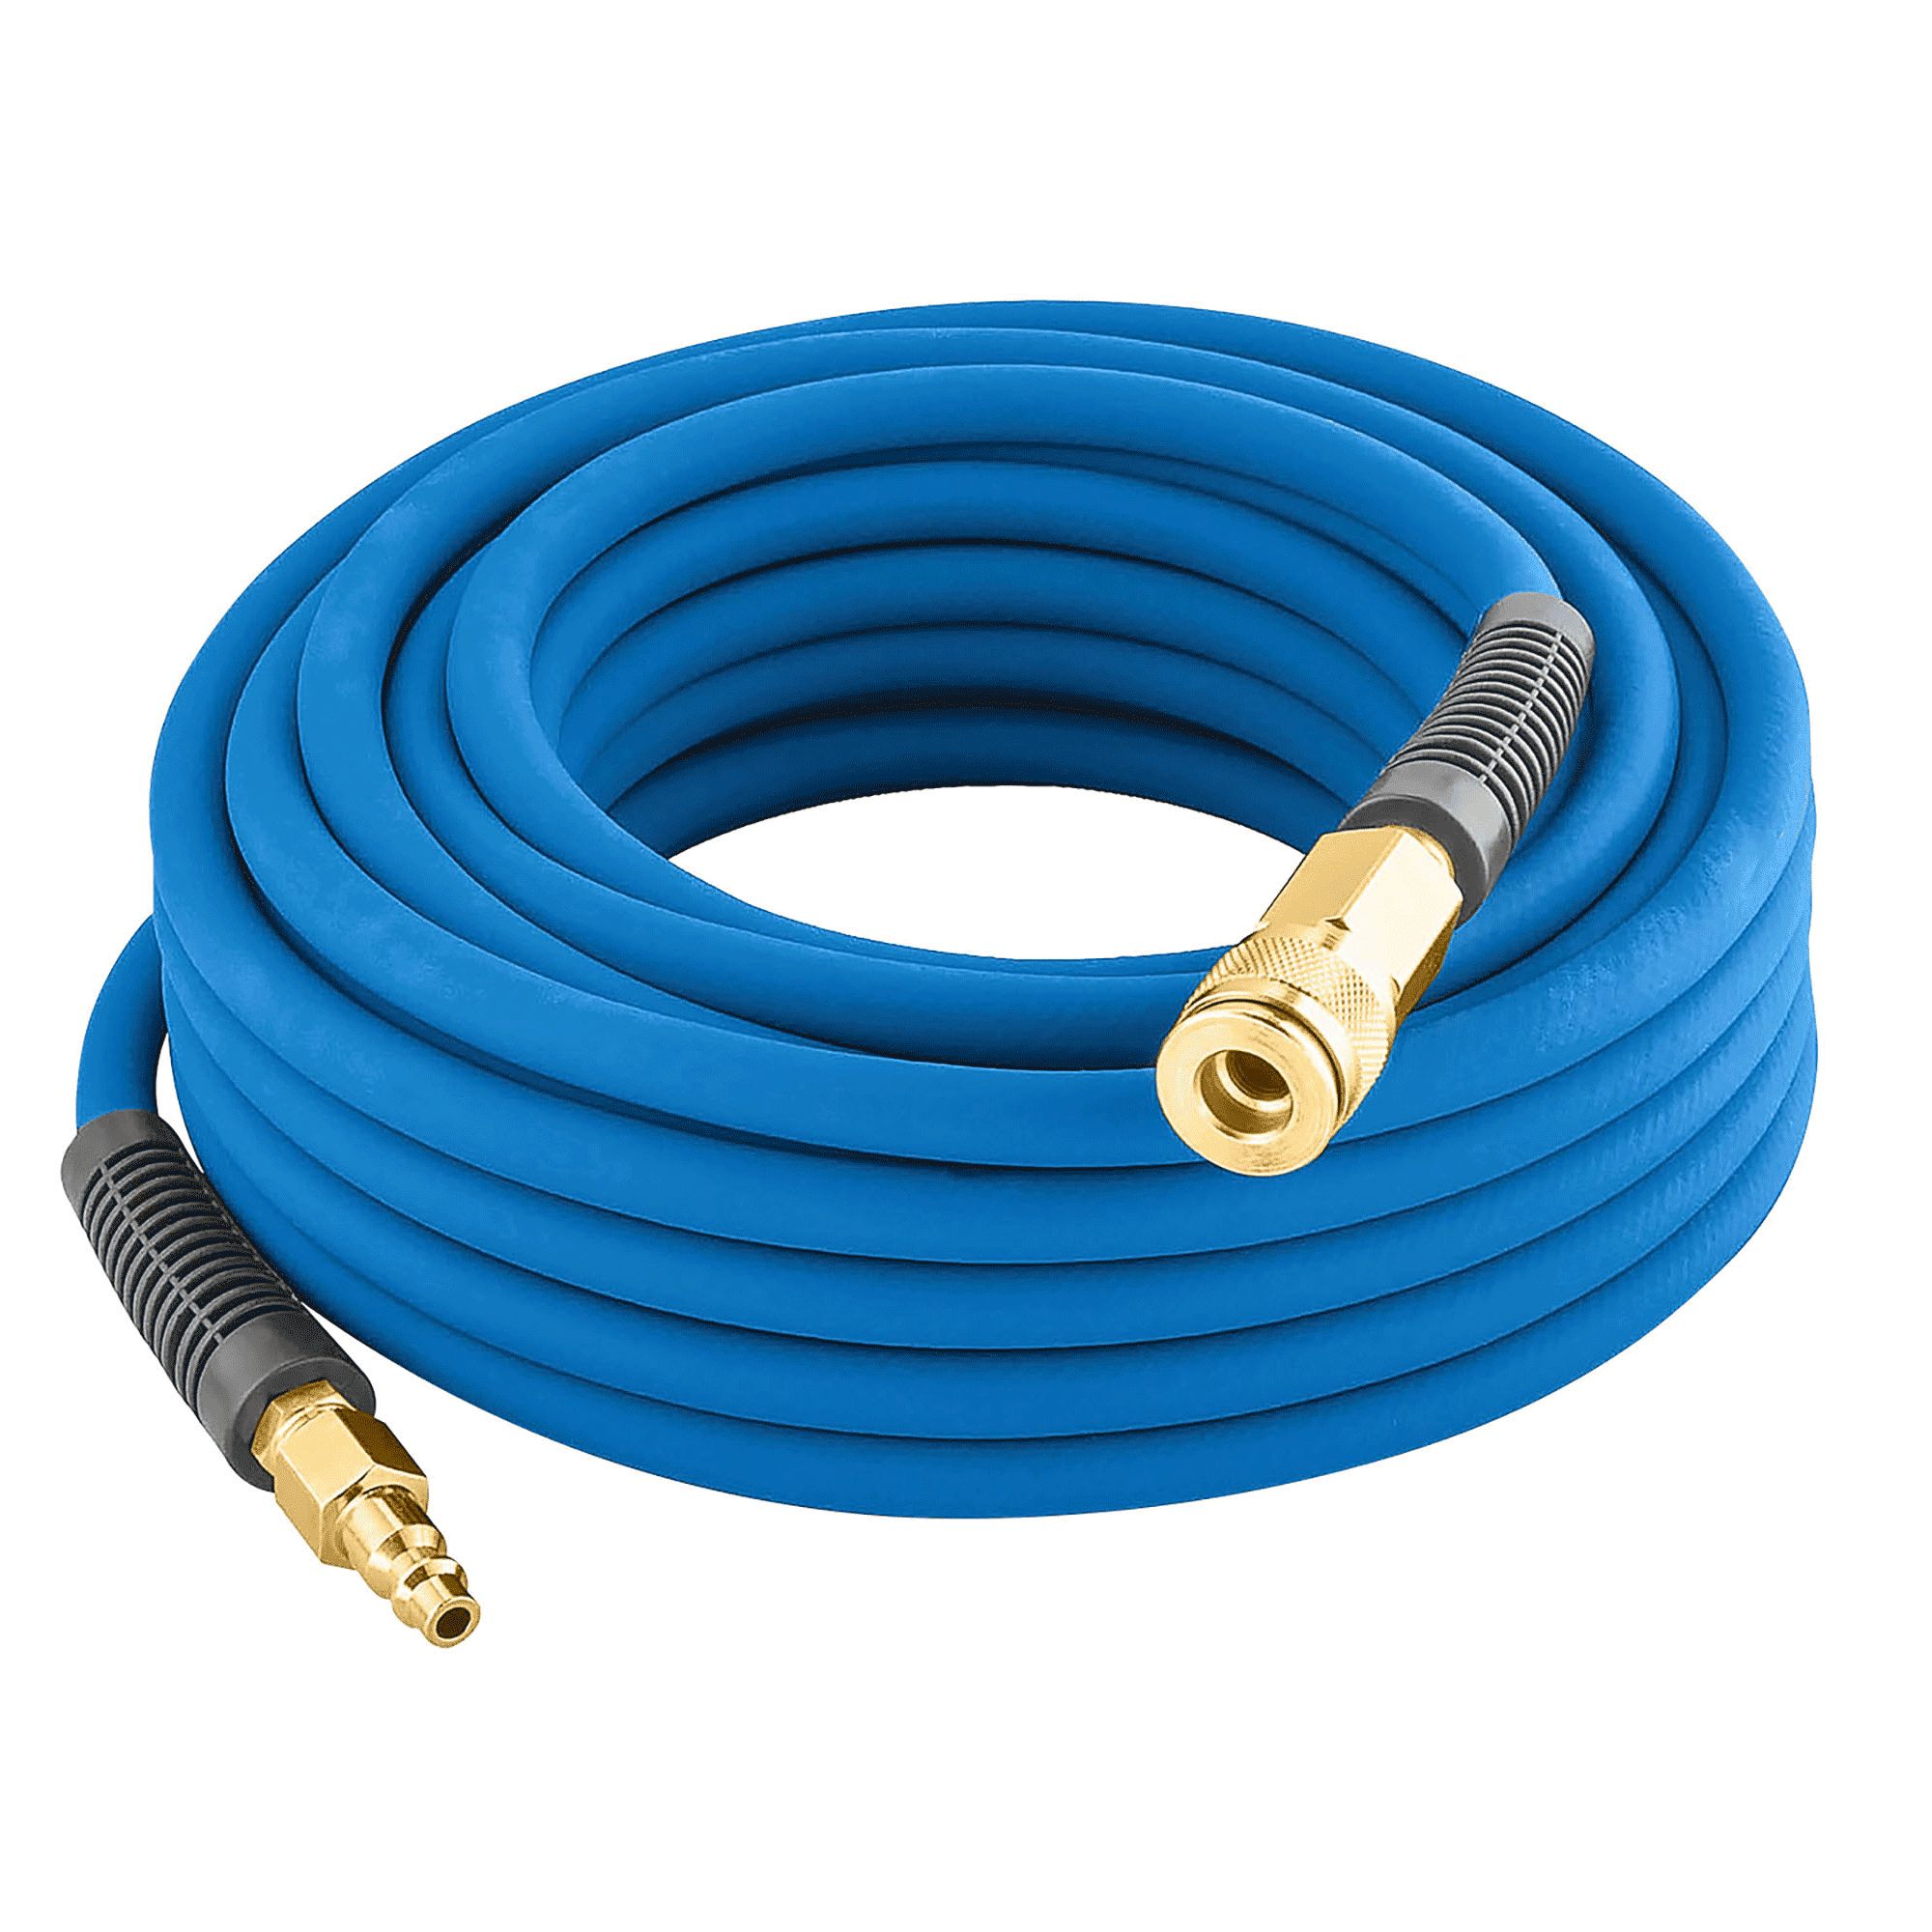 3/8-Inch x 50-Foot PVC/Rubber Hybrid Air Hose with 1/4-Inch NPT Brass  Fittings - Estwing